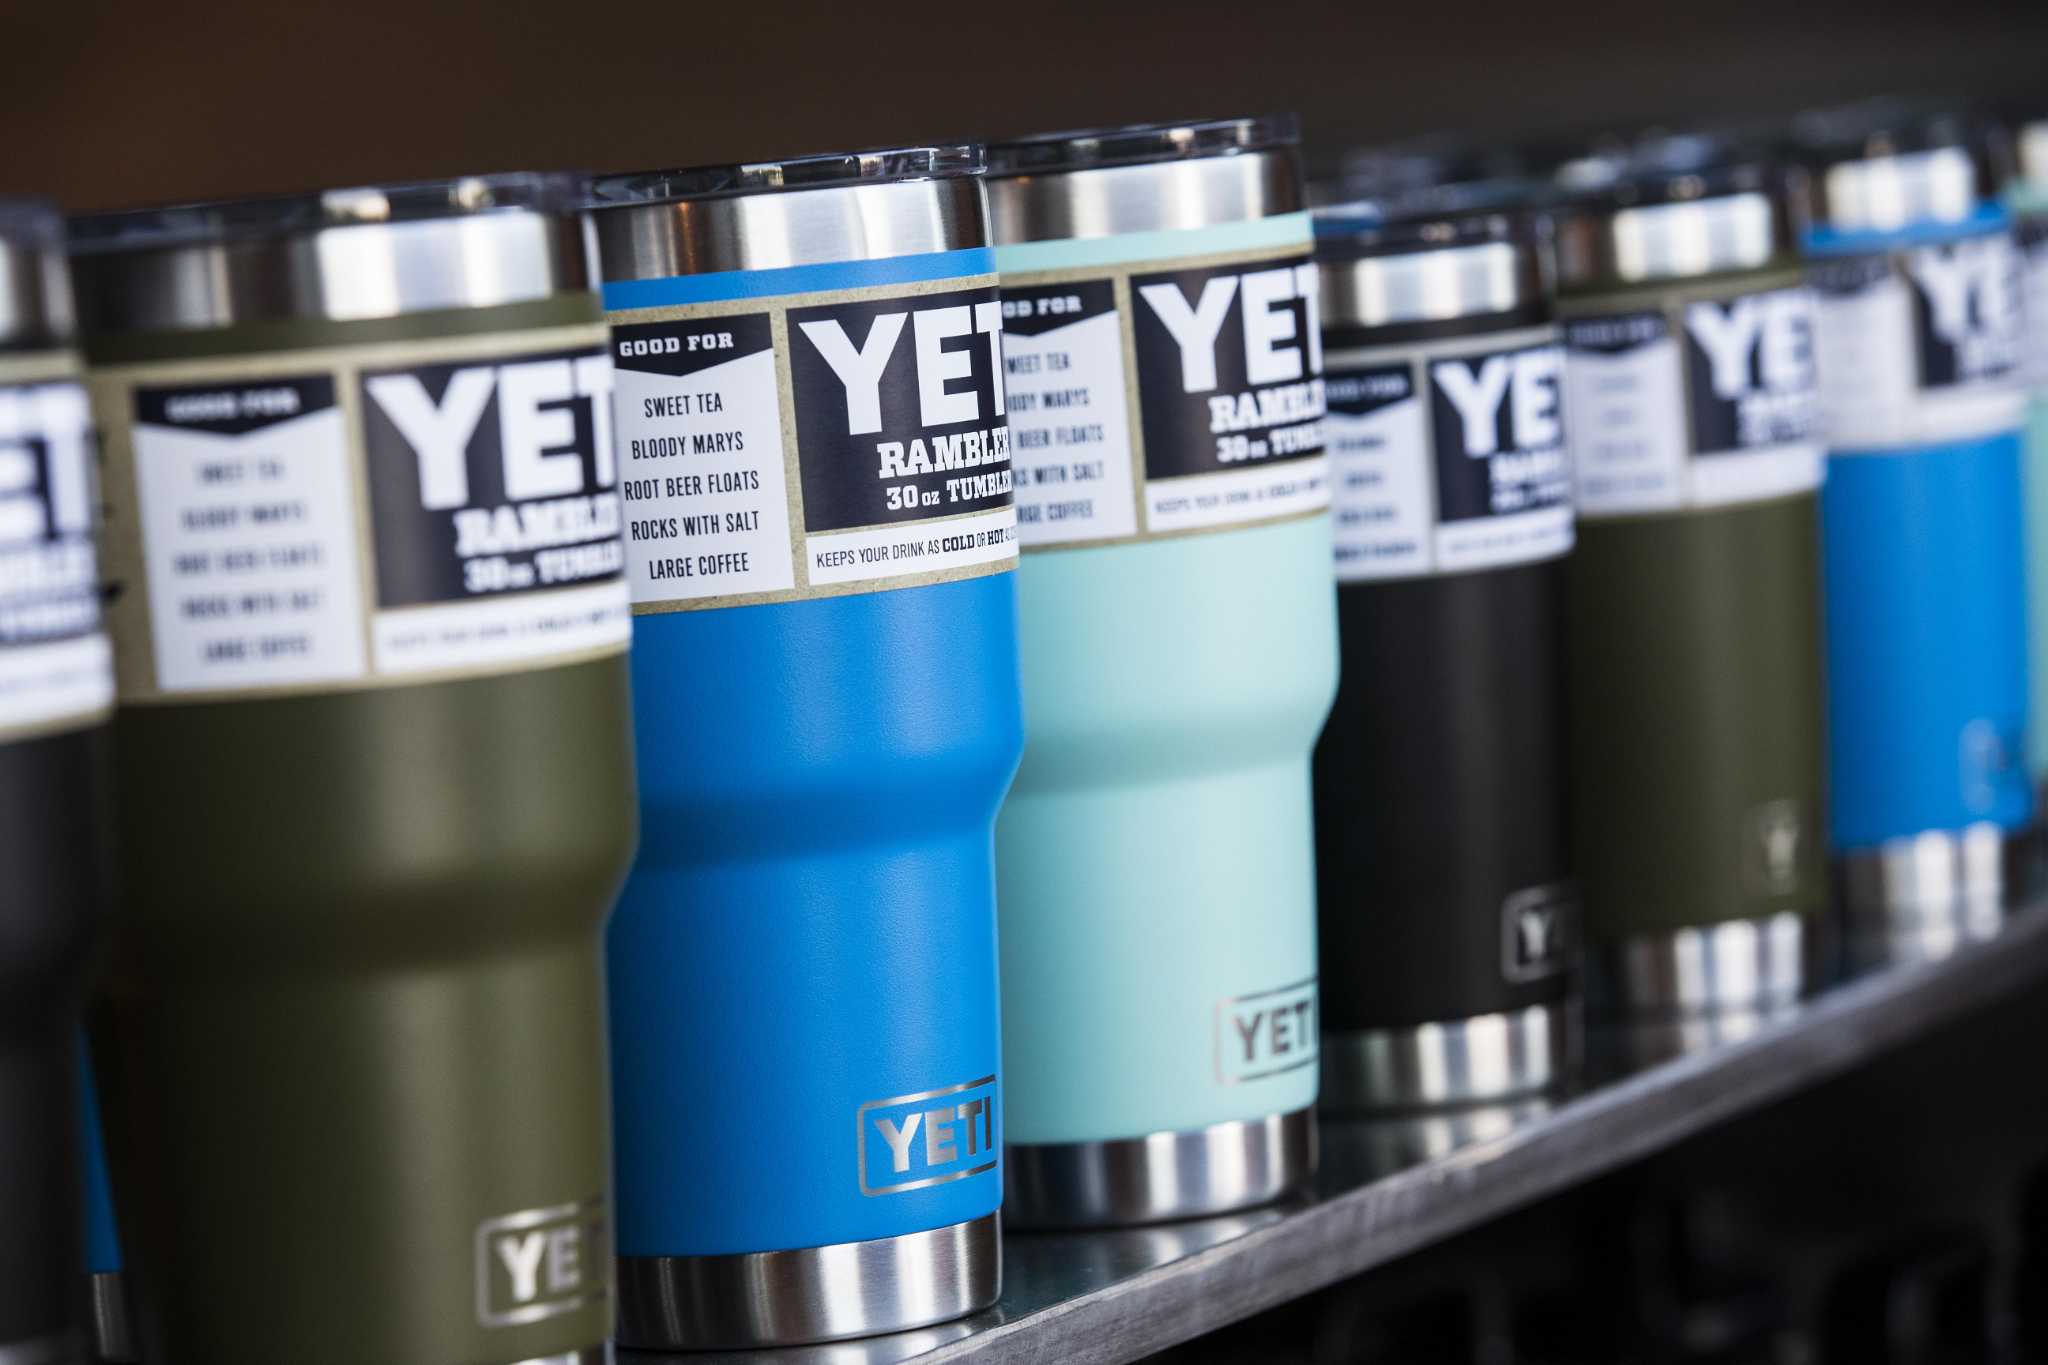 Local Store Responds To YETI, NRA Controversy